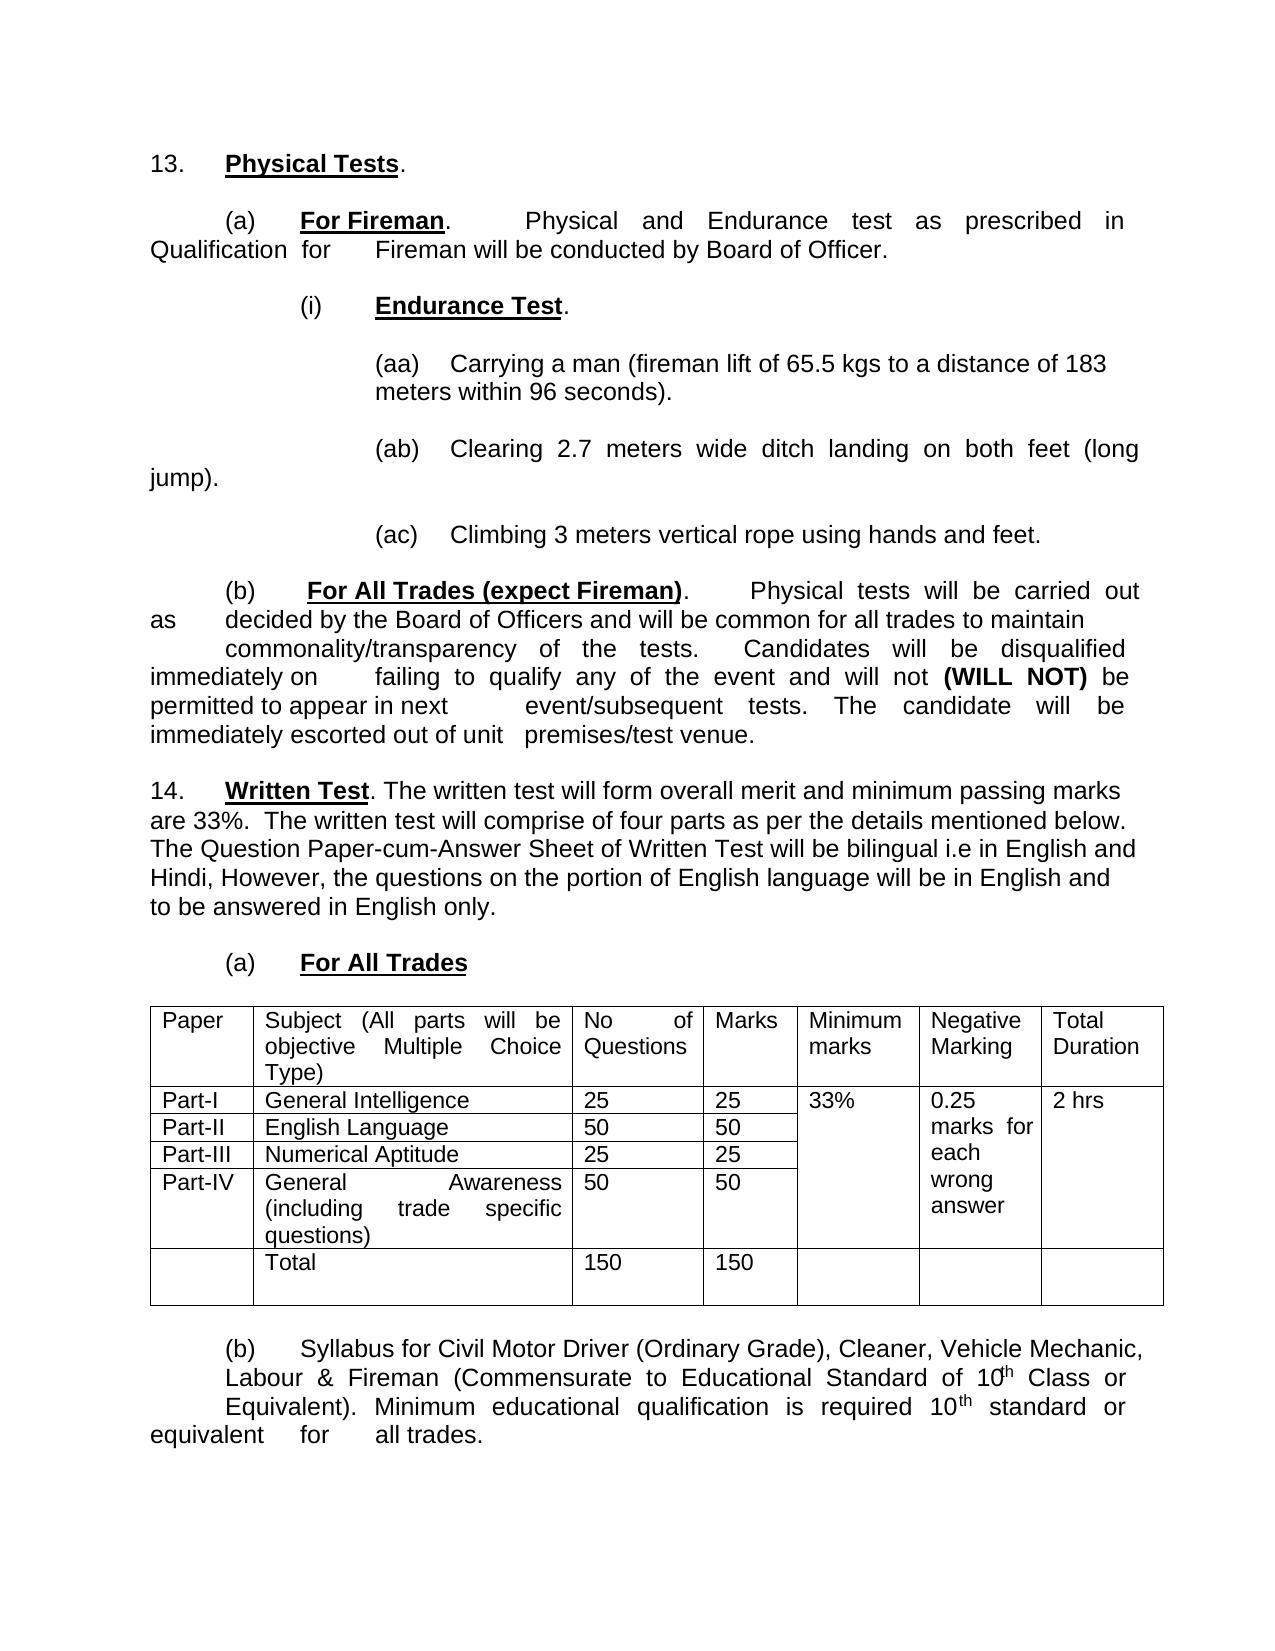 HQ Northern Command Fireman and Various Posts Recruitment 2022 - Page 9